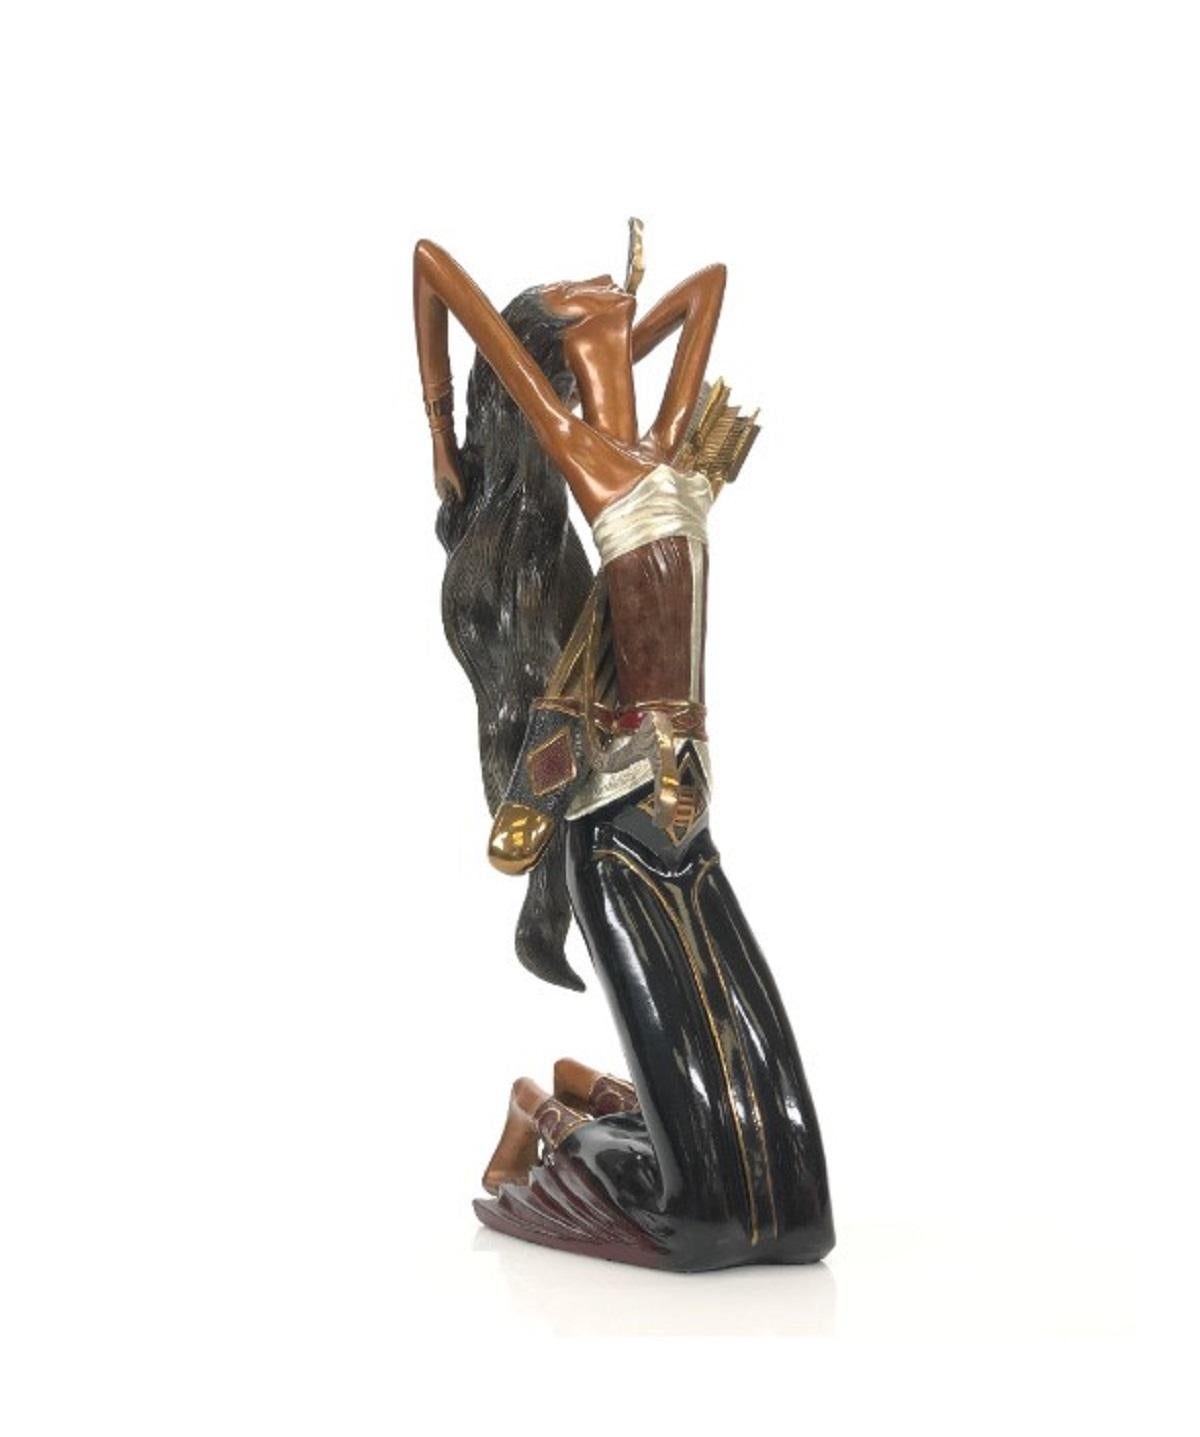 Ting Shao Kuang (1939, Chengdu, China)                                                                                                 "Huntress"  
Limited Edition Bronze Sculpture,
1990. 
Edition NUMBER 99/250. Signed on base.
 
19.5" H x 12"W 